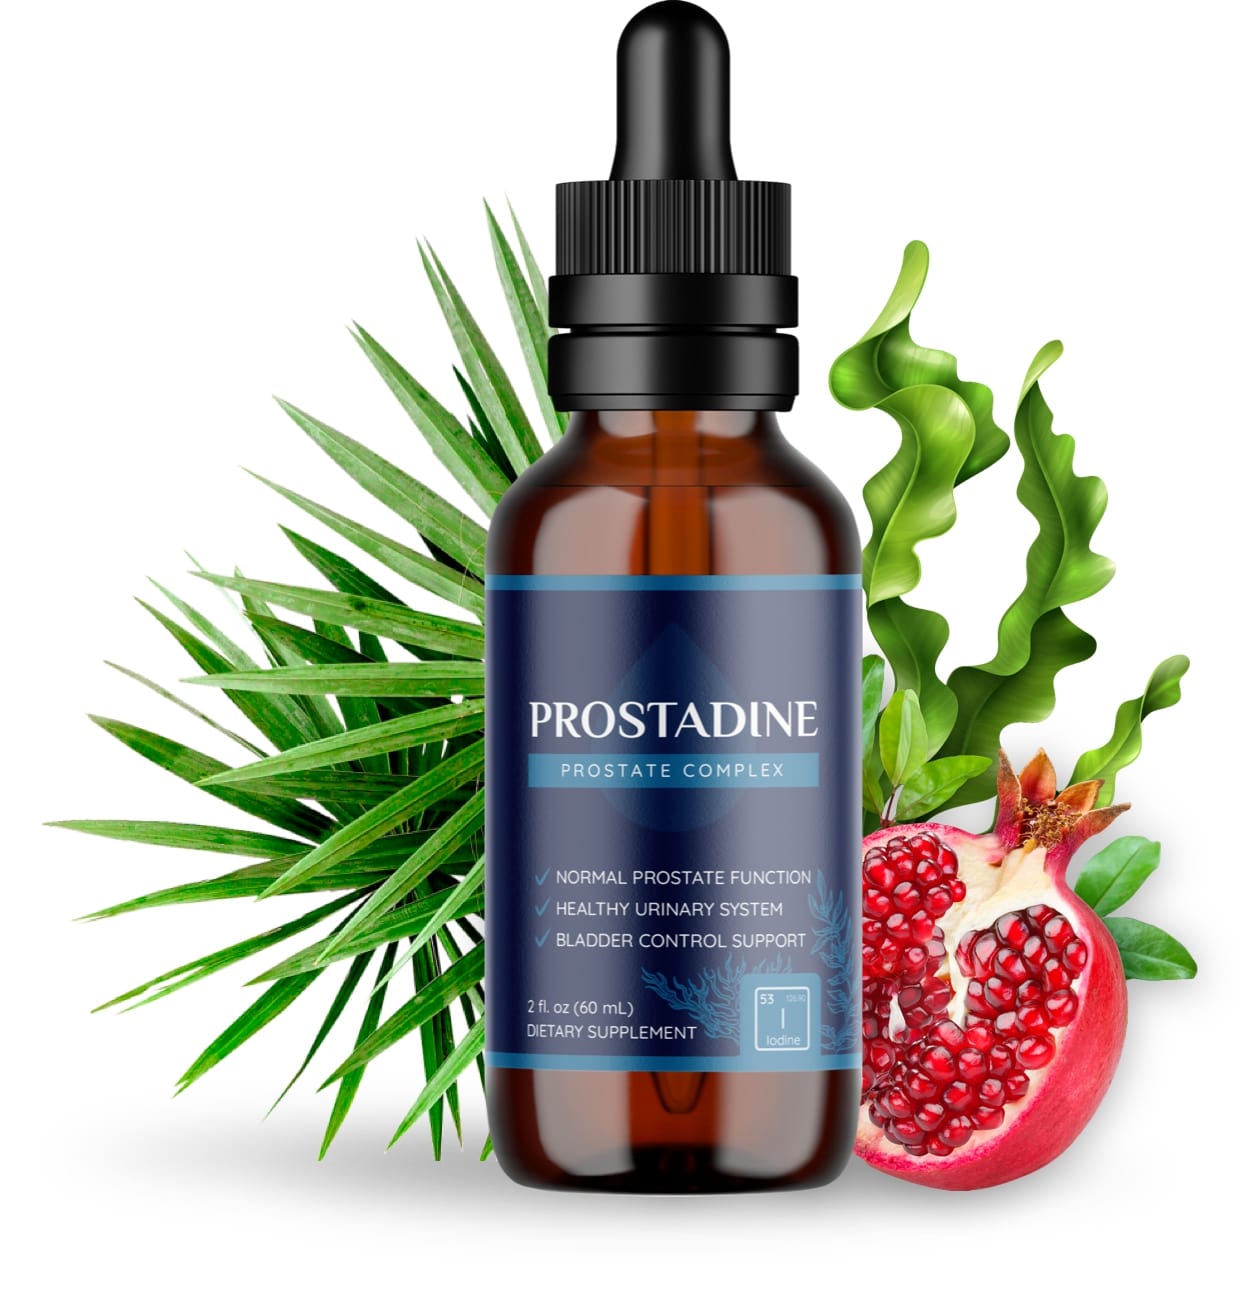 Prostadine Review: Can This Supplement Help Improve Prostate Health?